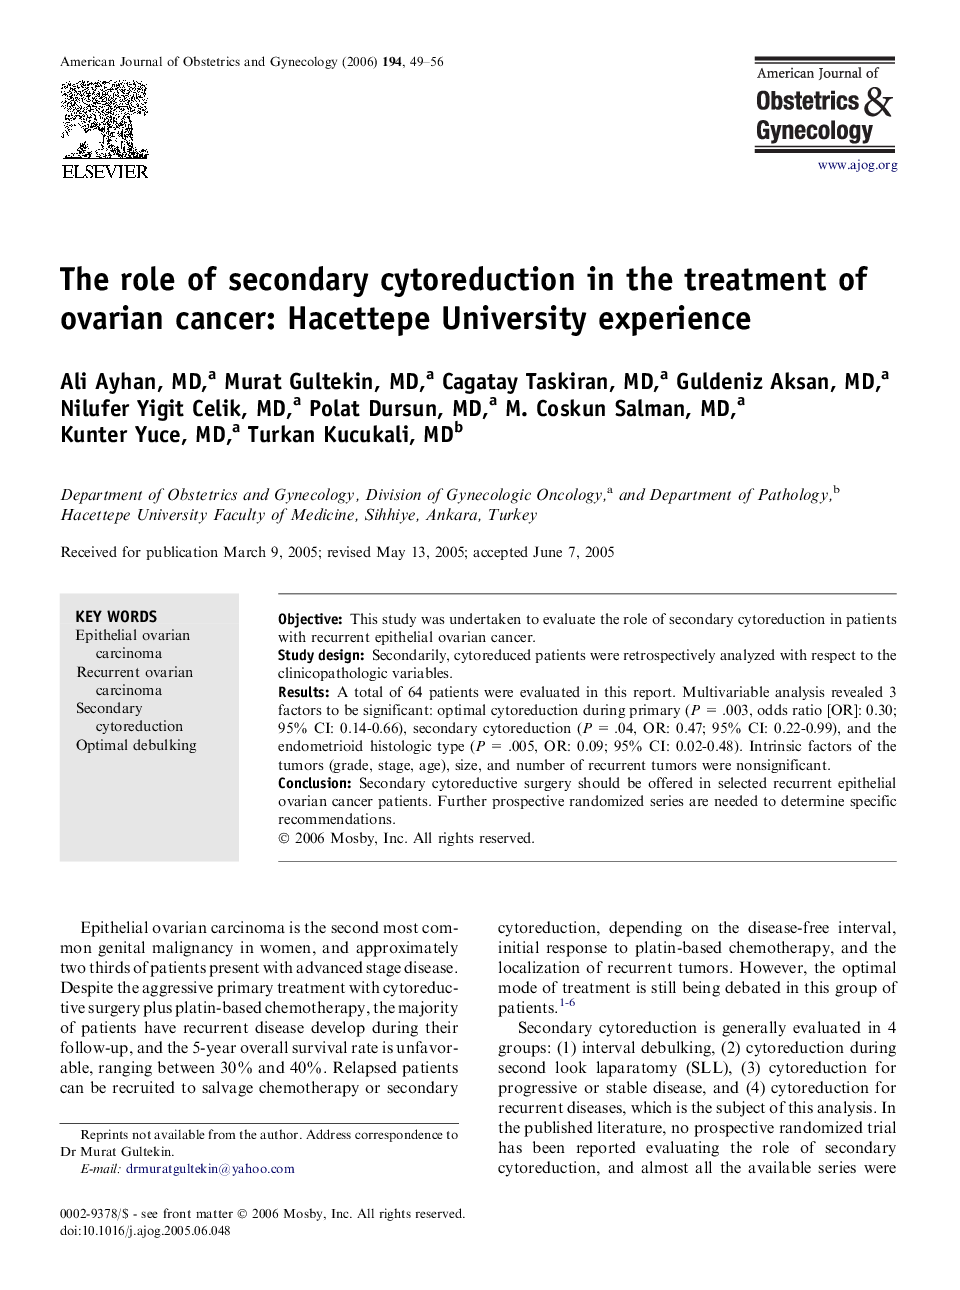 The role of secondary cytoreduction in the treatment of ovarian cancer: Hacettepe University experience 